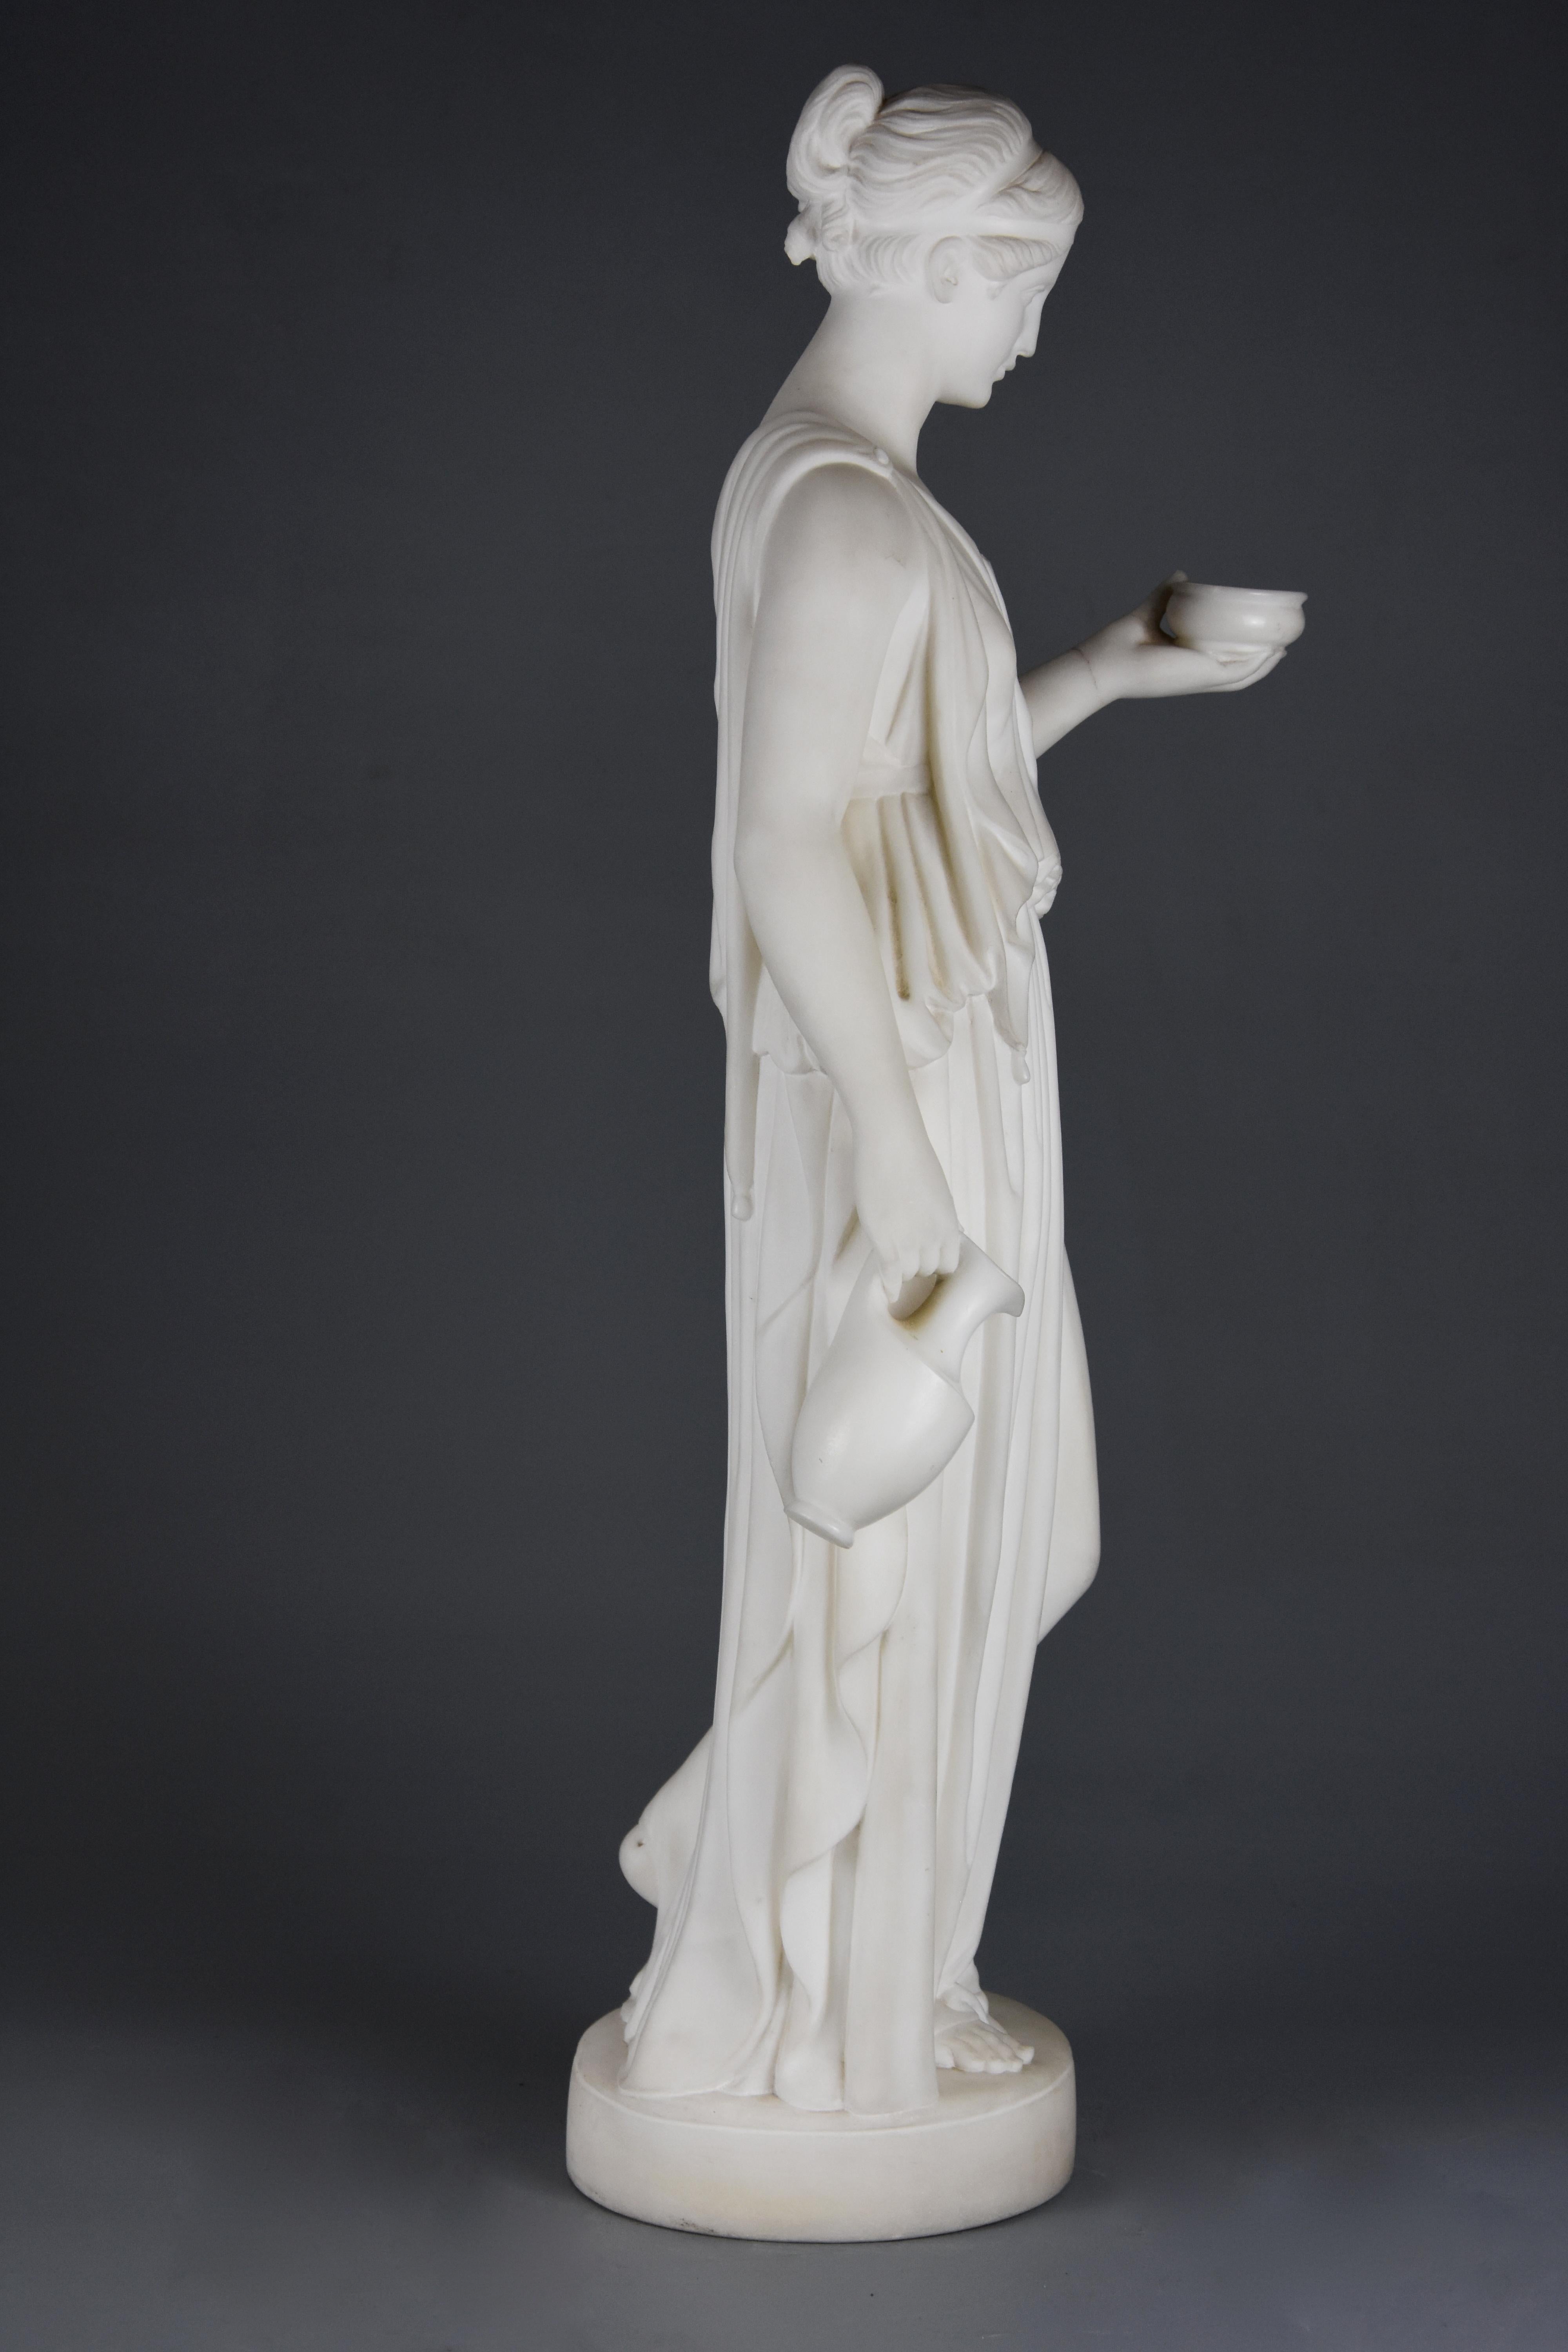 Fine Quality Mid-19th Century Carved Marble Figure of Hebe, Goddess of Youth 4